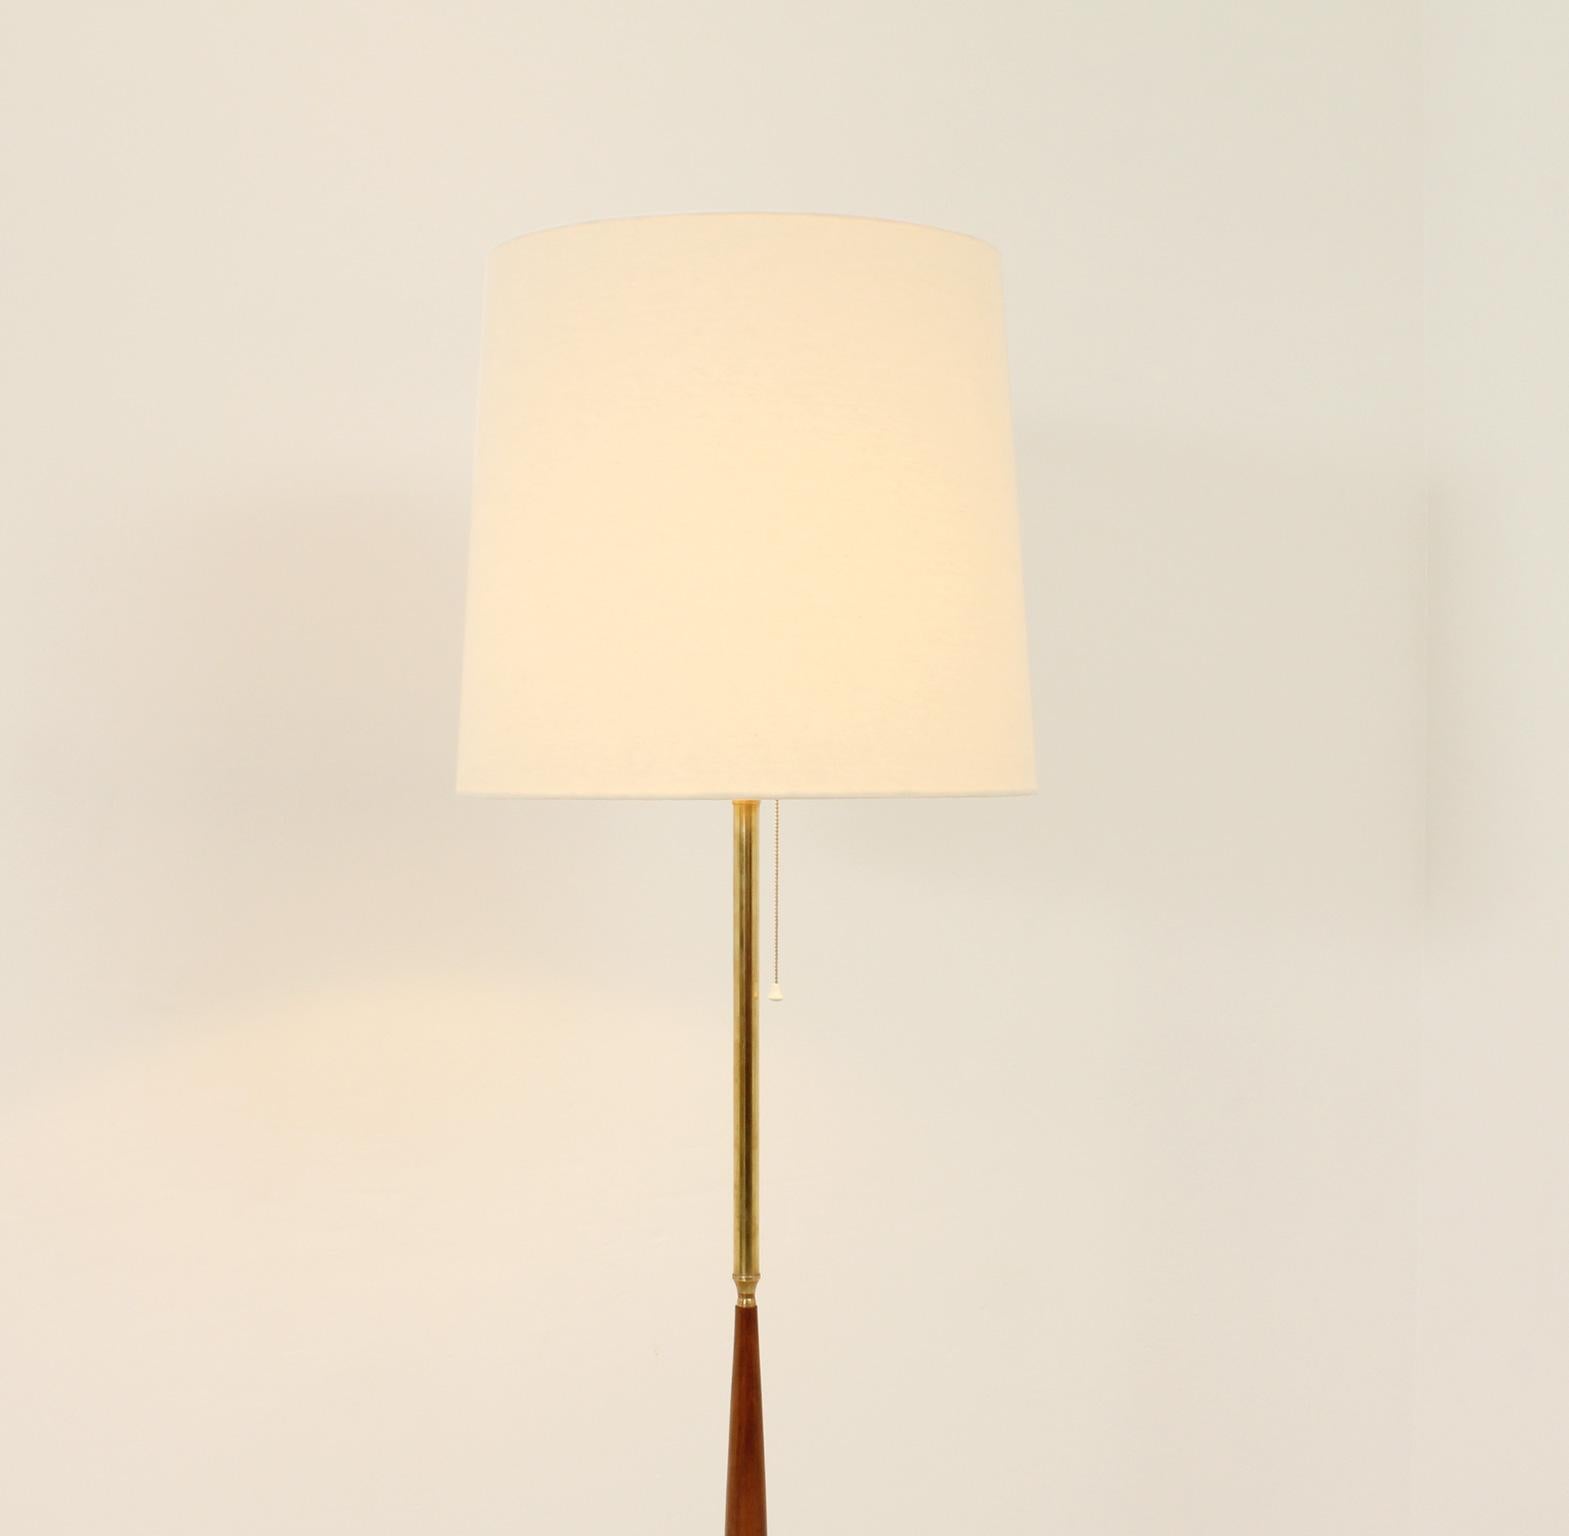 Spanish Floor Lamp in Brass and Walnut Wood from 1950s For Sale 4